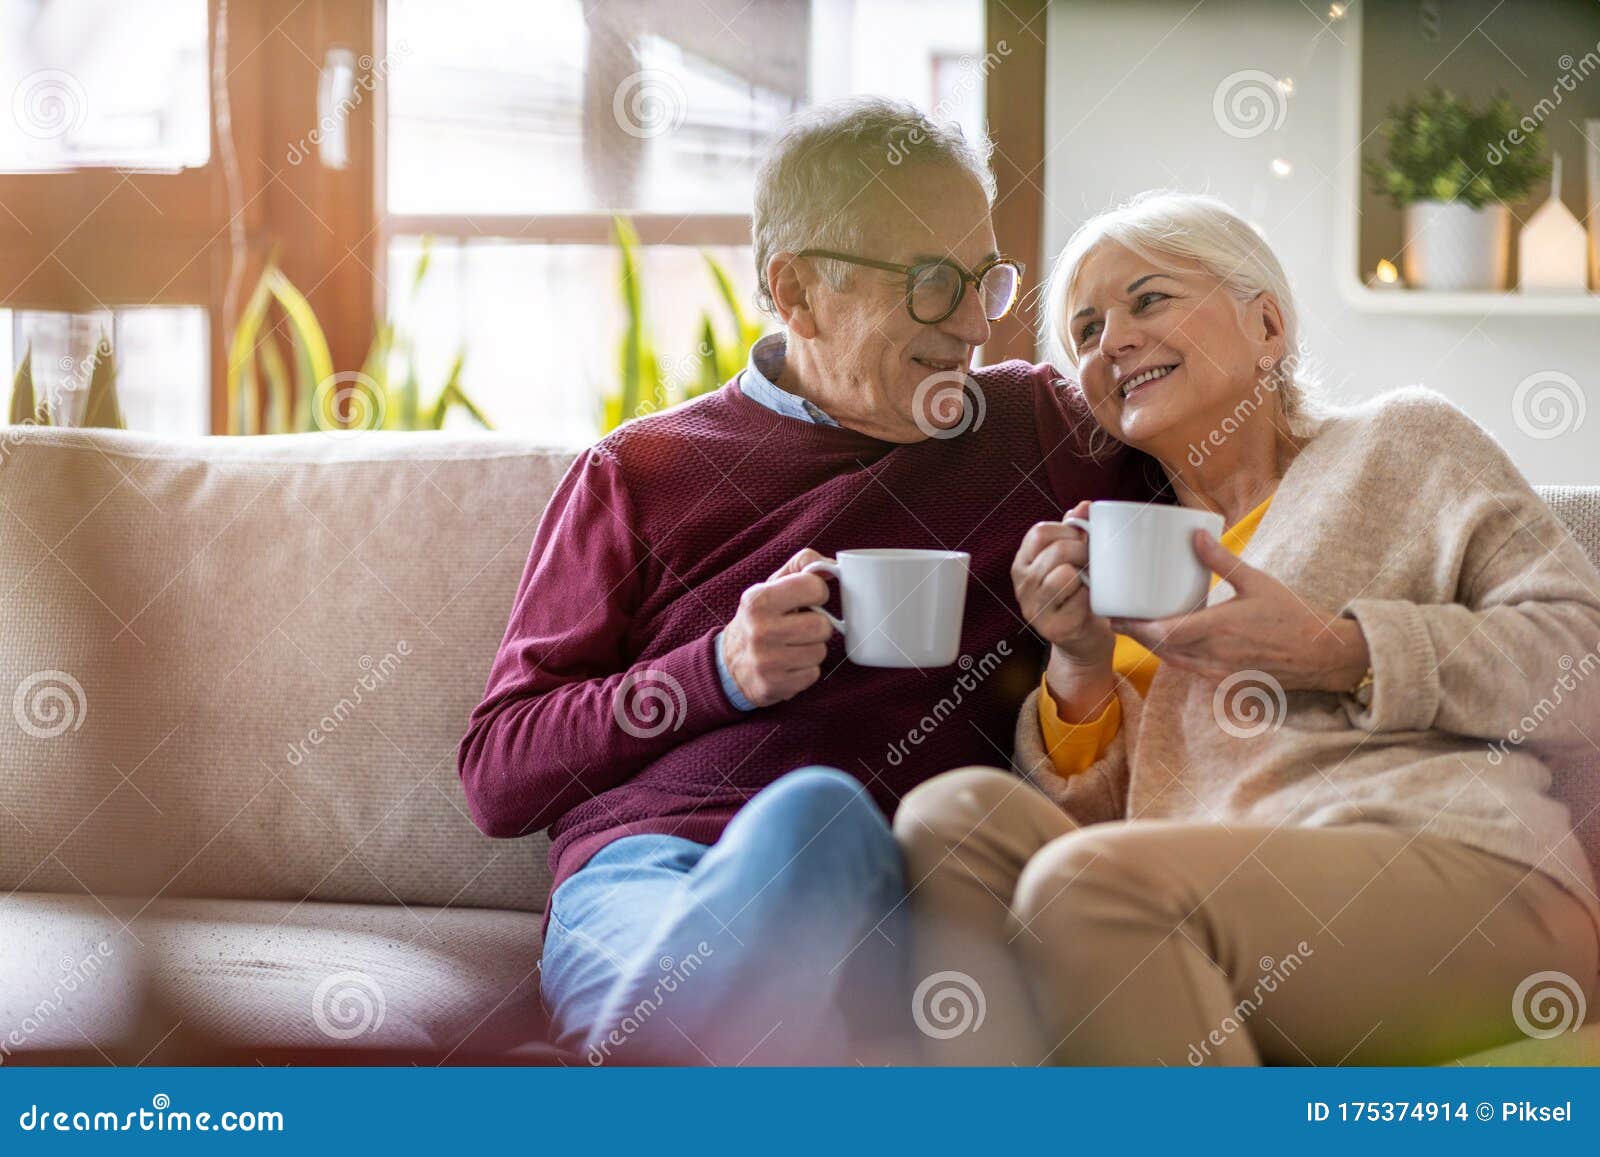 happy elderly couple relaxing together on the sofa at home